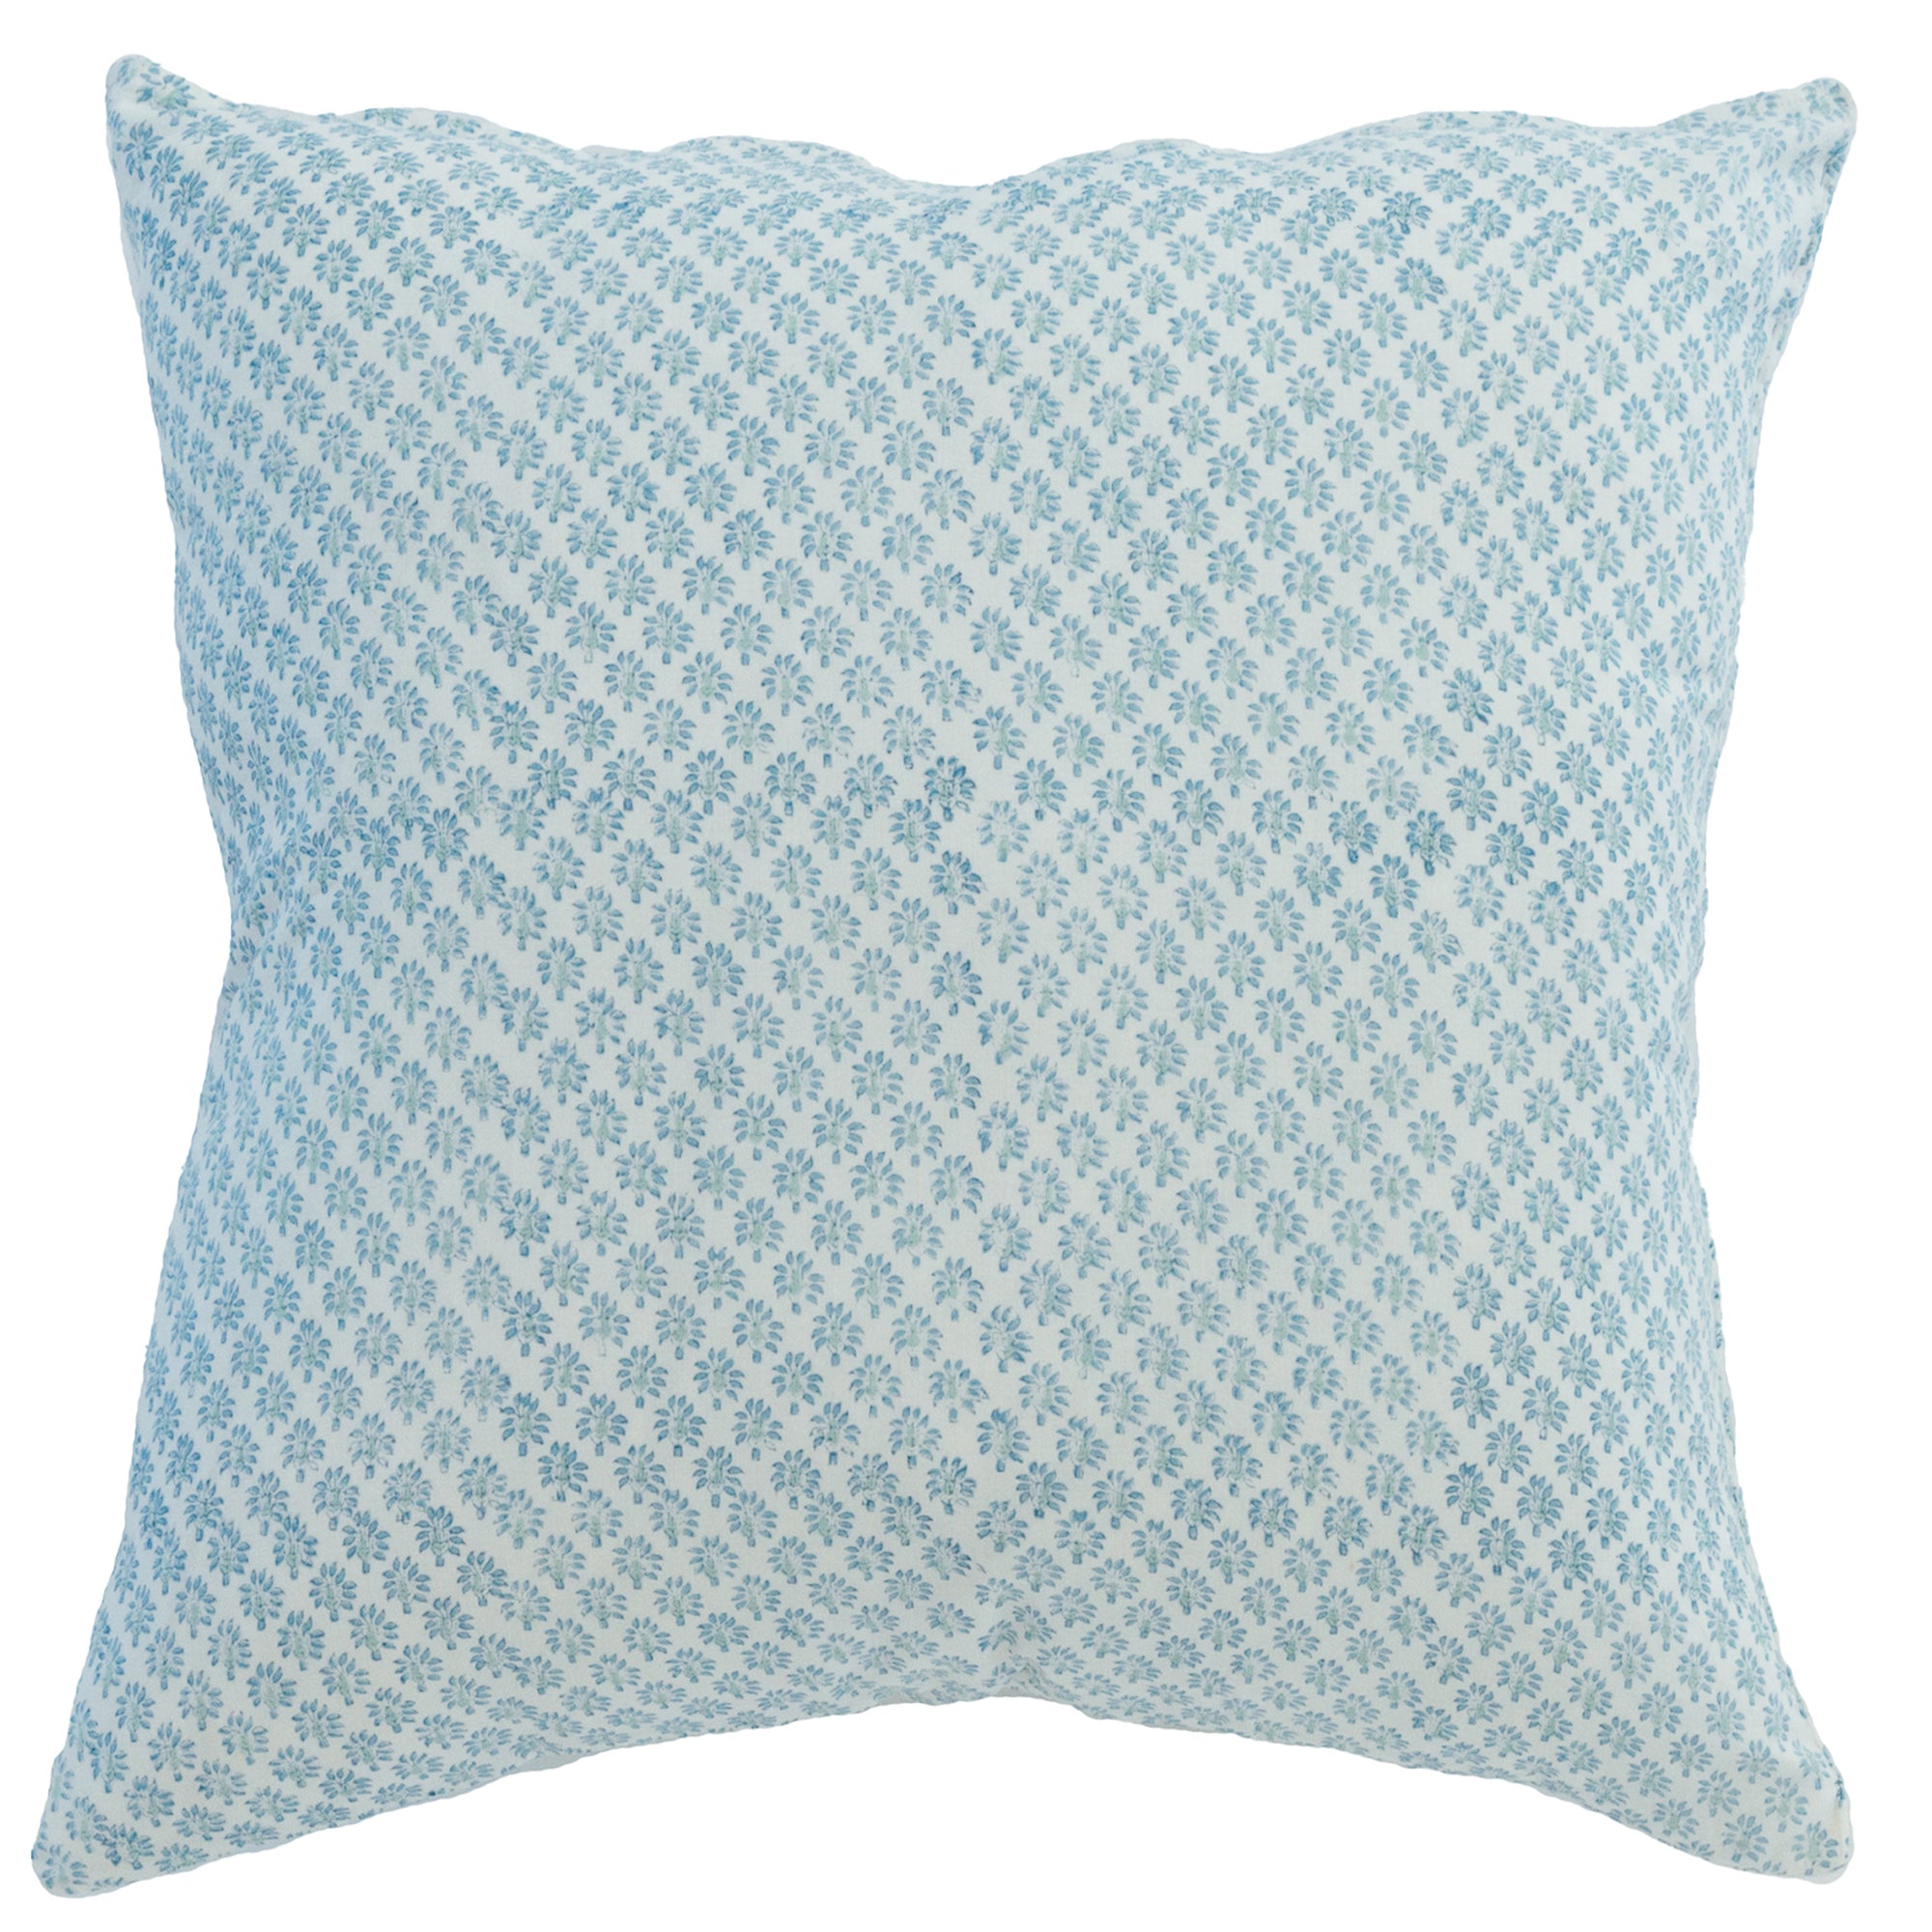 Pineapple Euro Pillow Cover